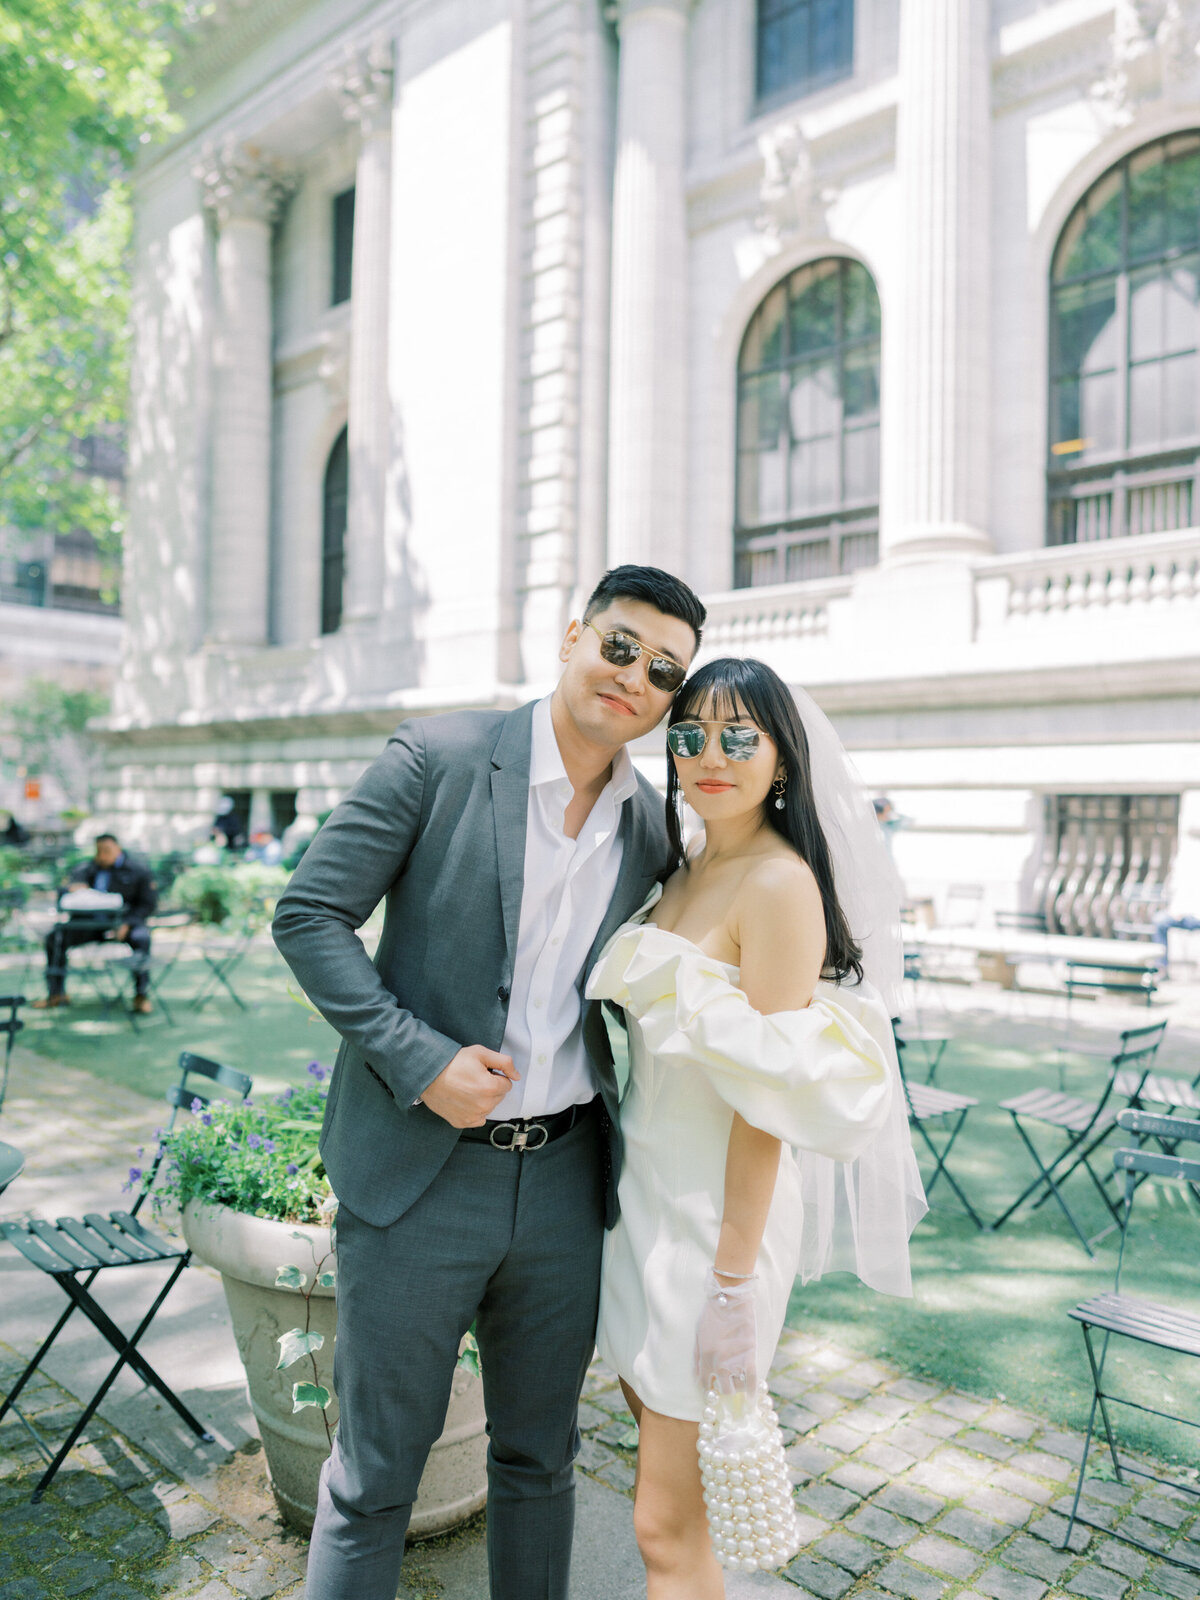 Vogue Editiorial NYC Elopement Themed Engagement Session Highlights | Amarachi Ikeji Photography 10